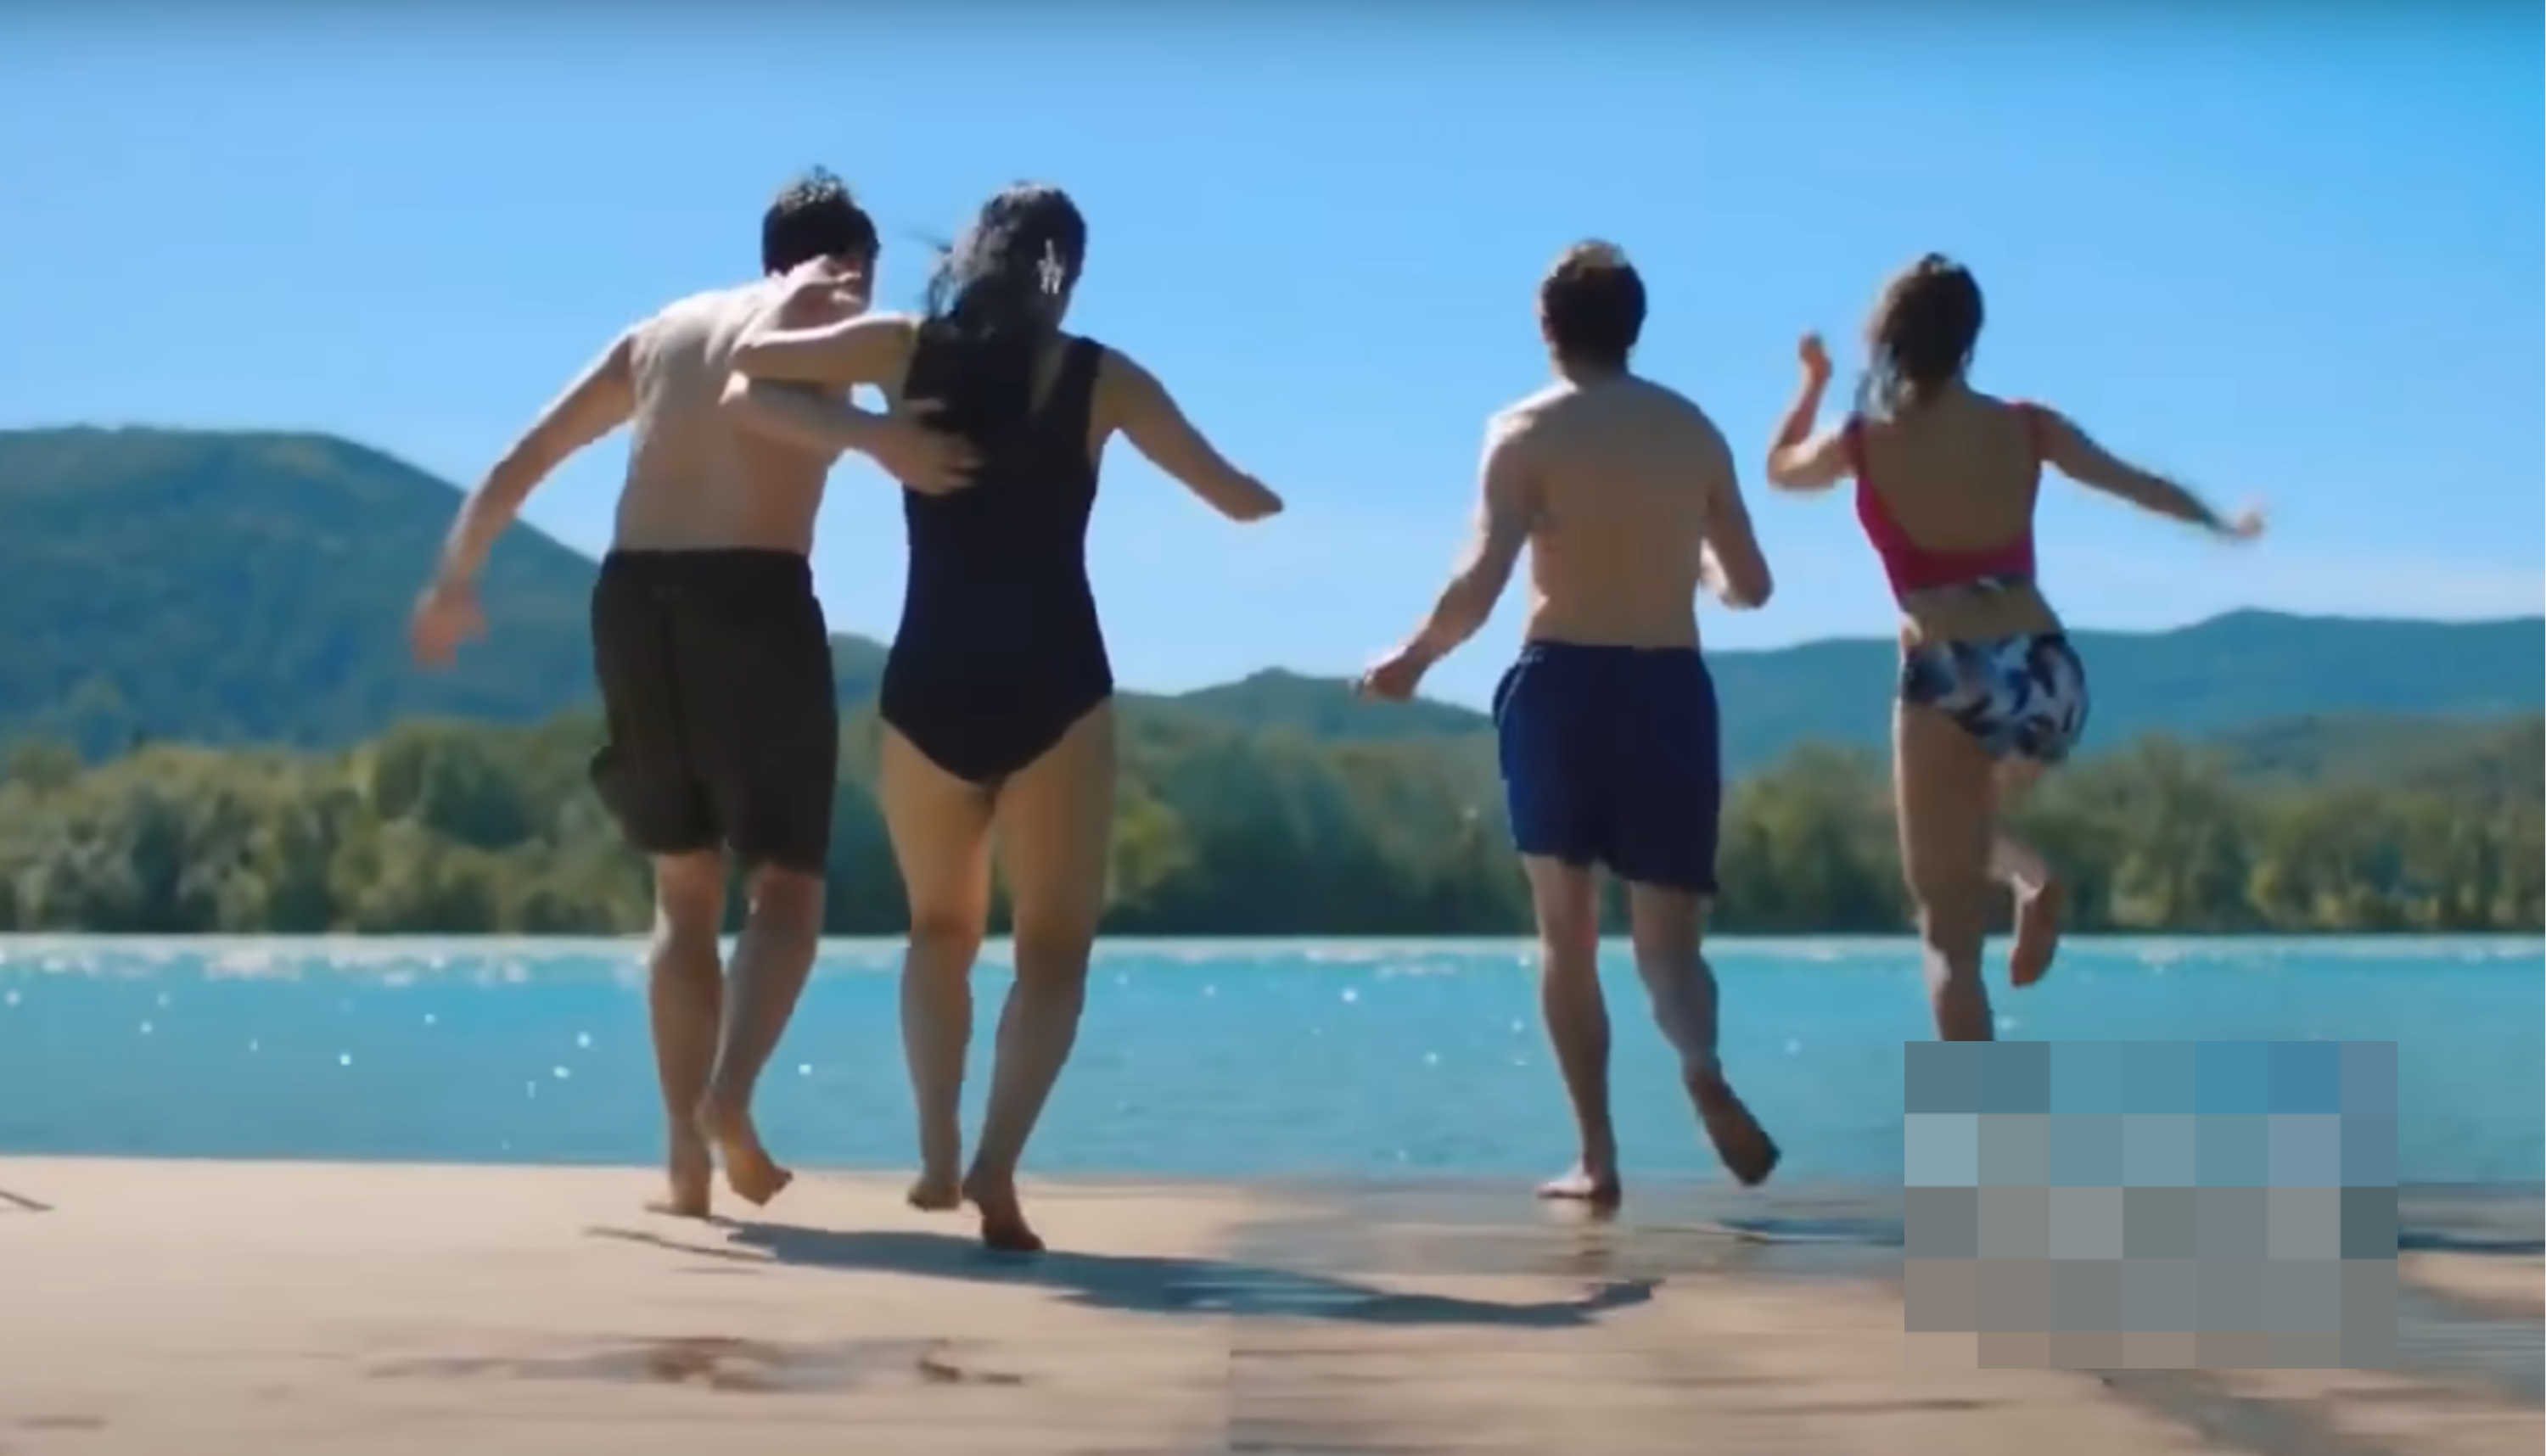 Four friends holding hands and jumping into a lake, with text for Skyrizi, an advertised medication